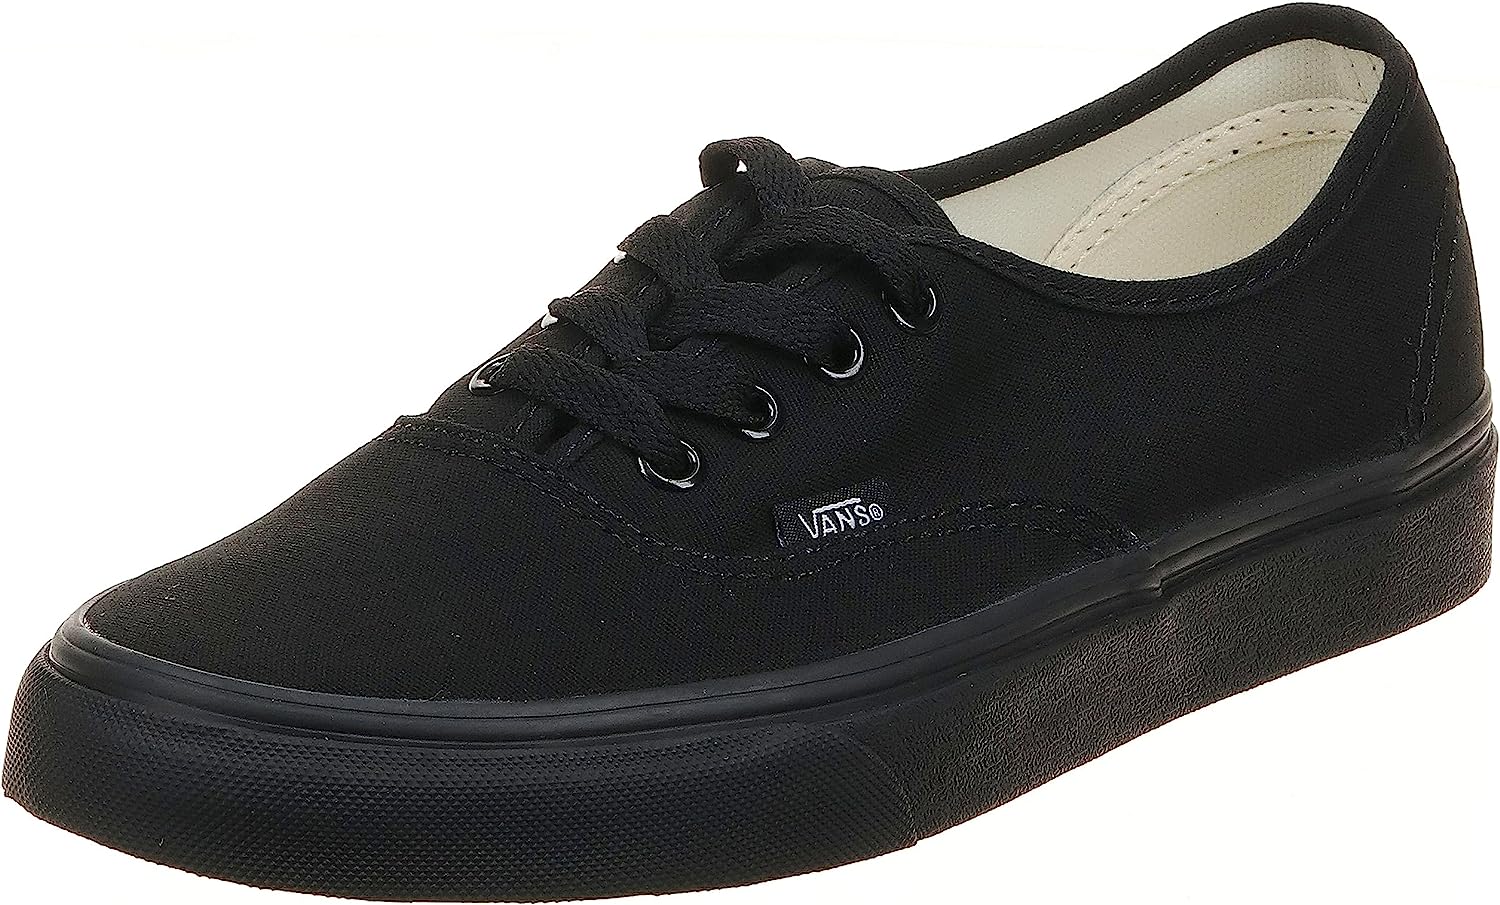 Vans Women's for Leisure and Sports Low-Top Sneakers